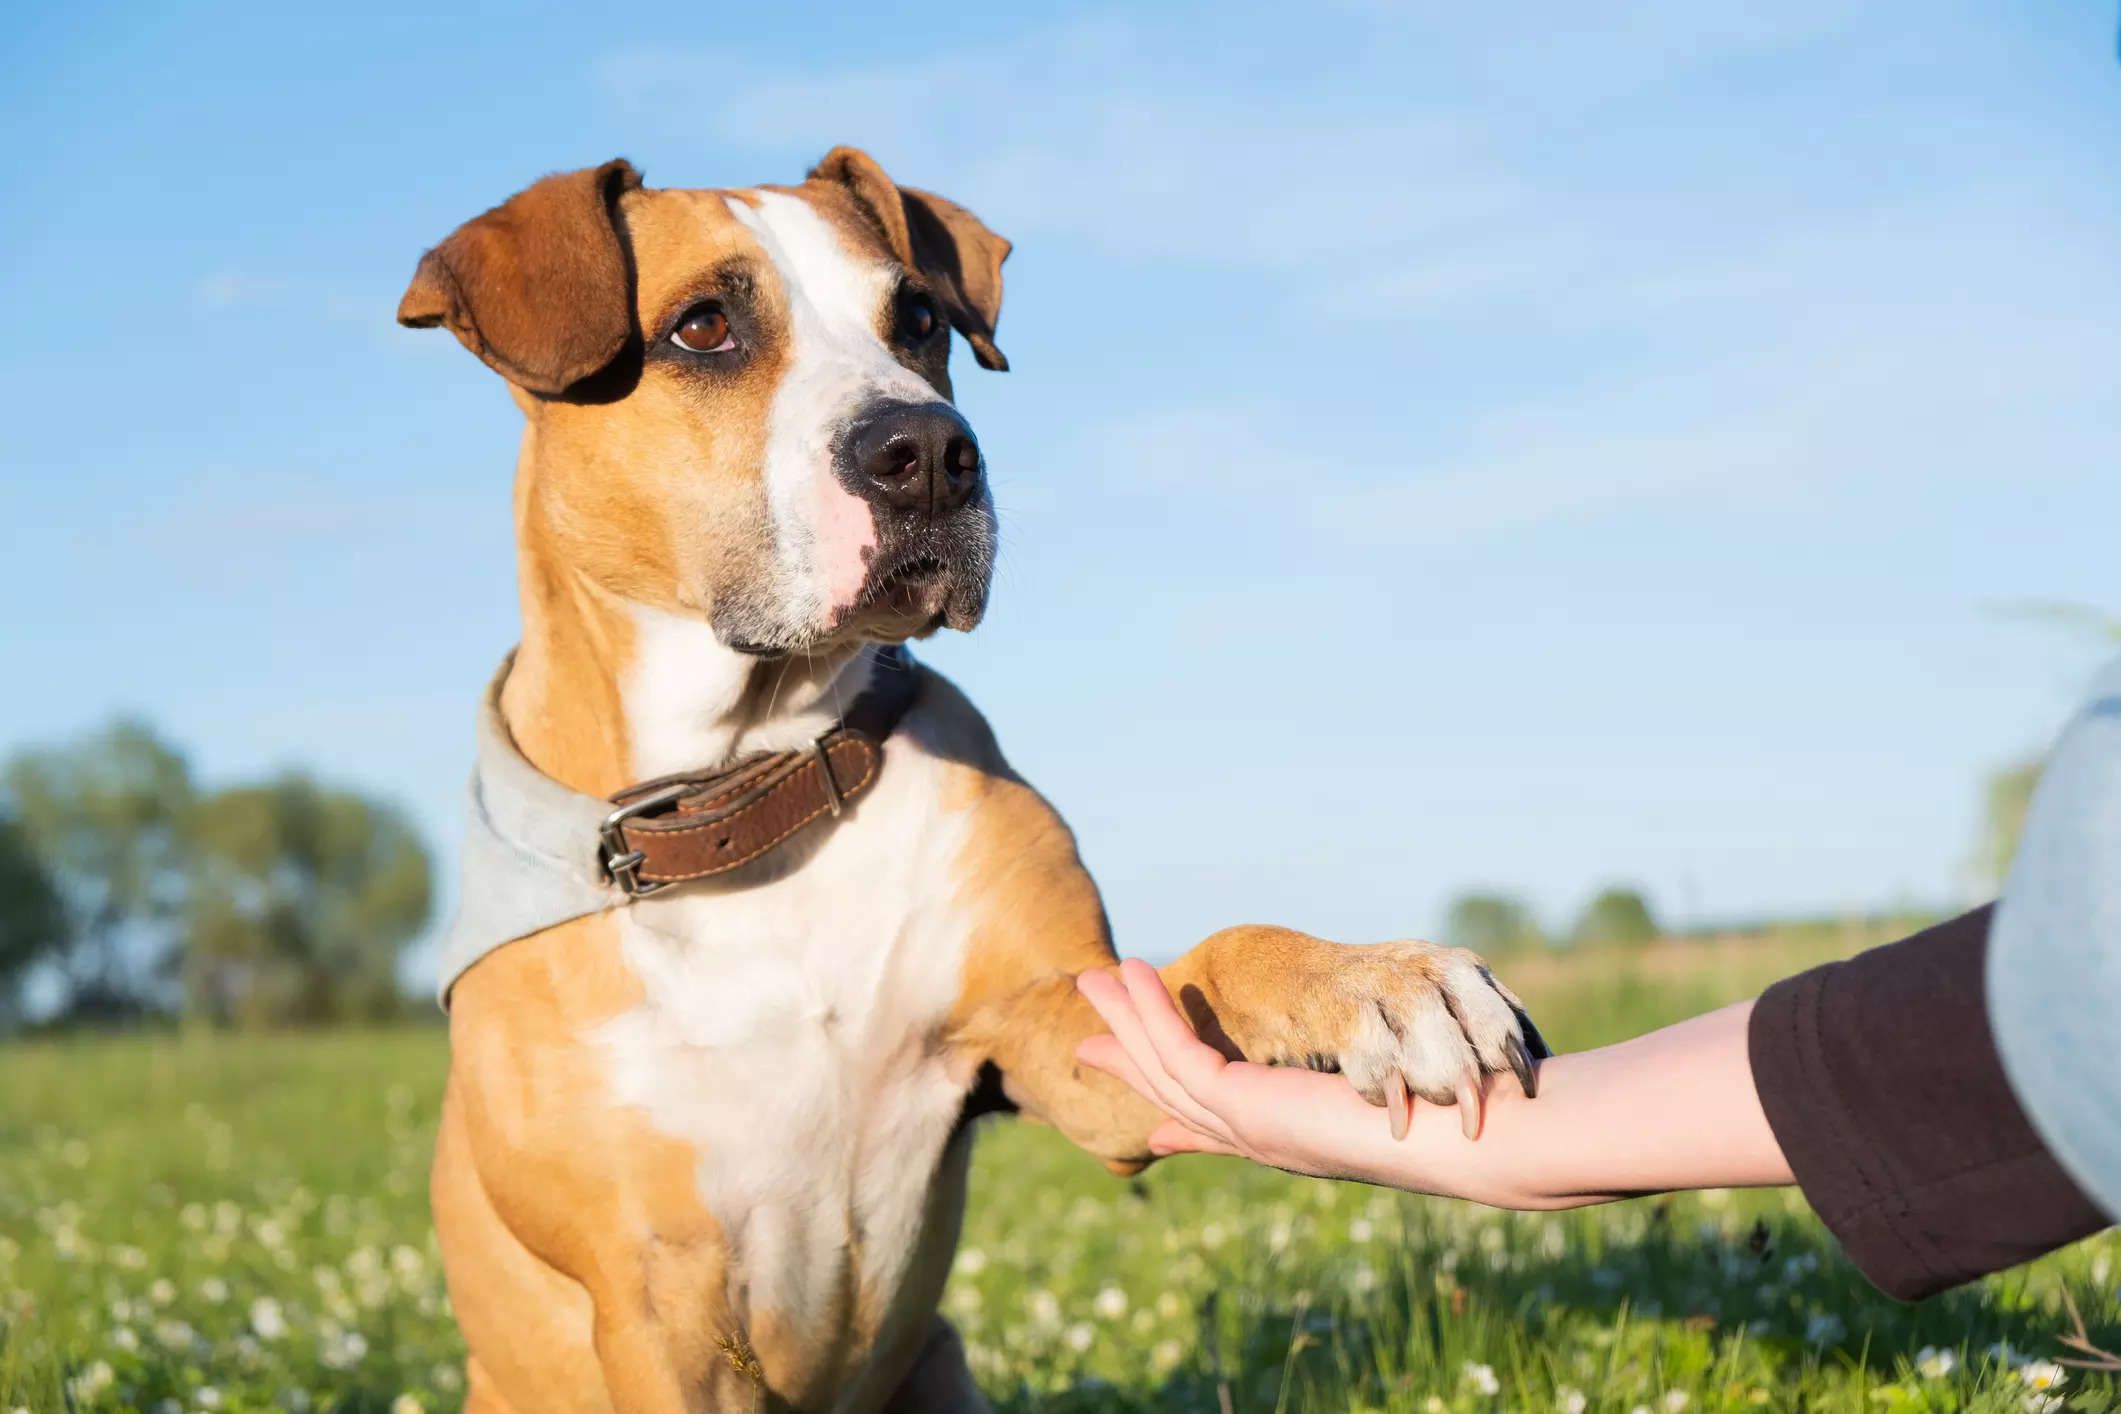 Spending time with dogs can reduce pain: Study